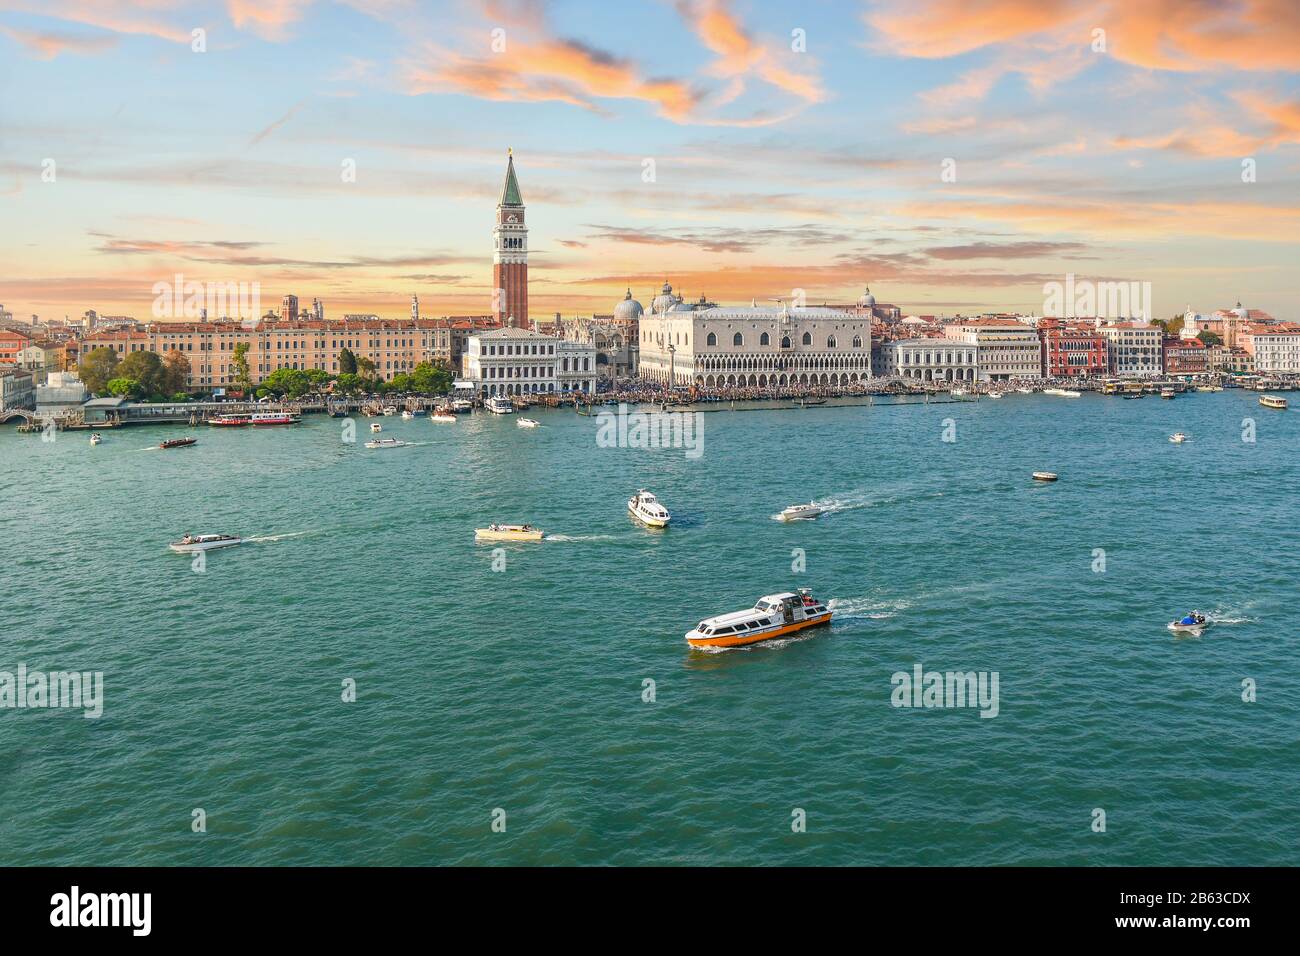 Sunset aerial view of the Grand Canal and Giudecca Canal converging in front of Piazza San Marco, Campanile tower and Doge's Palace in Venice, Italy Stock Photo